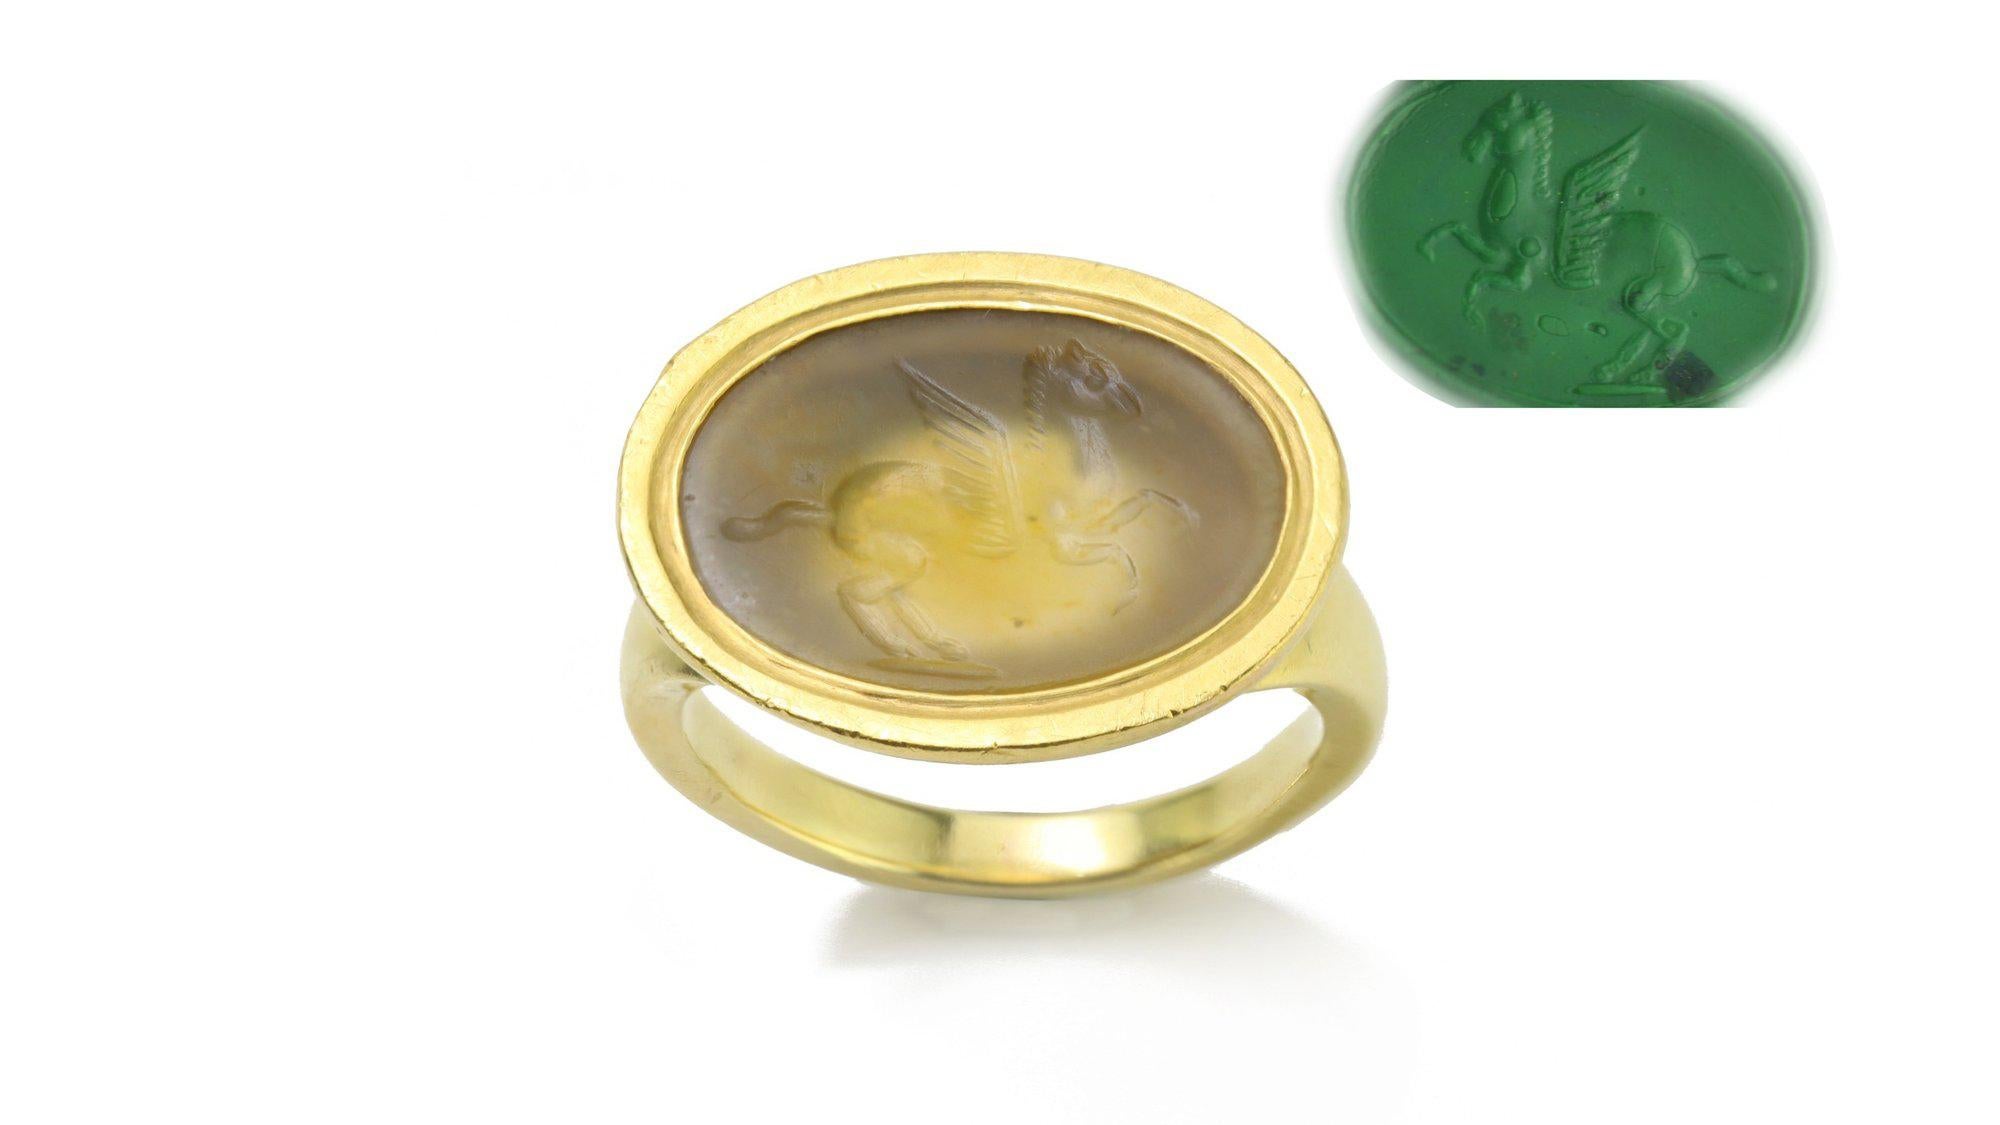 Ancient Roman agate intaglio of Pegasus in vintage high carat setting as a ring.
Intaglio made in Circa 200 BC - with shank added later Circa 1980's.
Tested positive for 18kt gold.

Pegasus is one of the best known mythological creatures in Greek